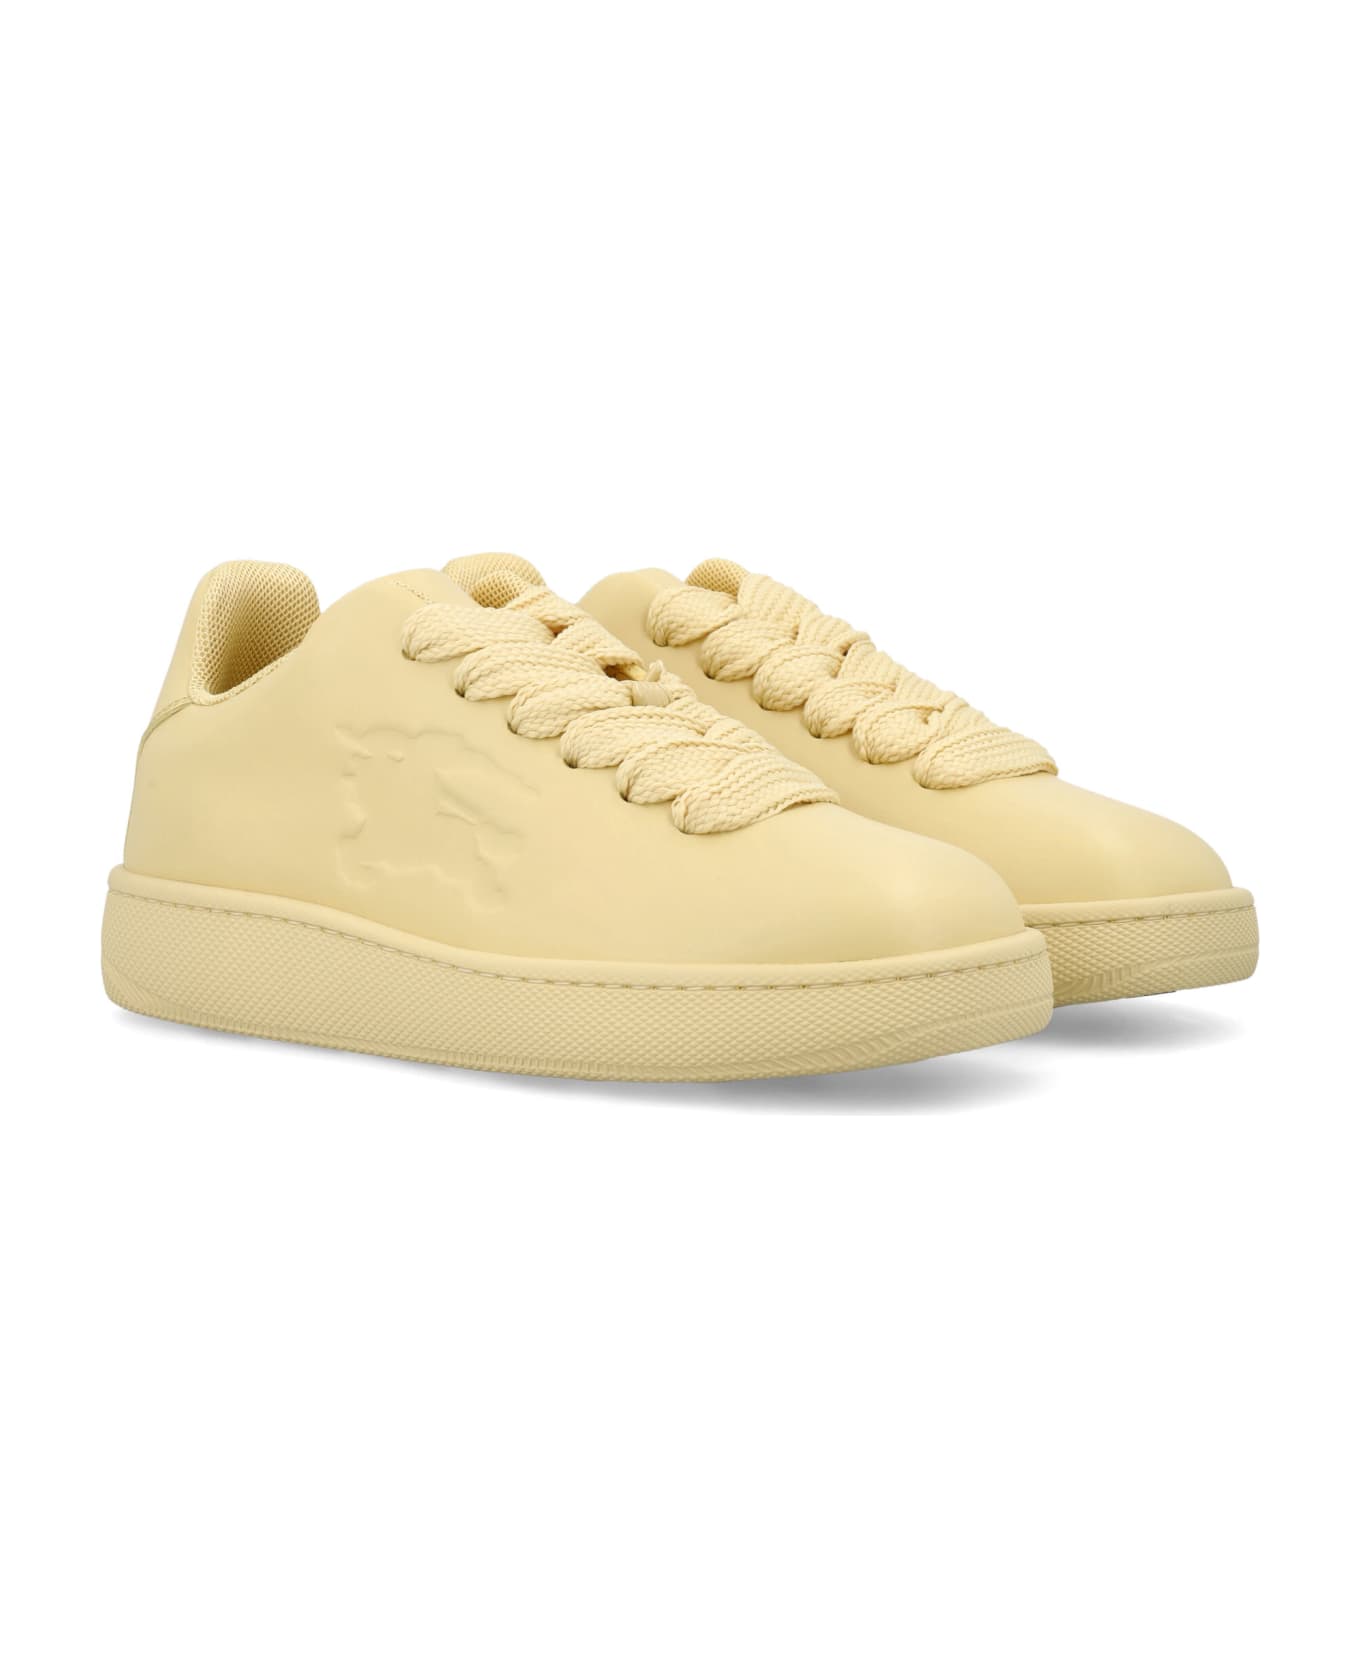 Burberry London Leather Box Sneakers - DAFFODIL スニーカー